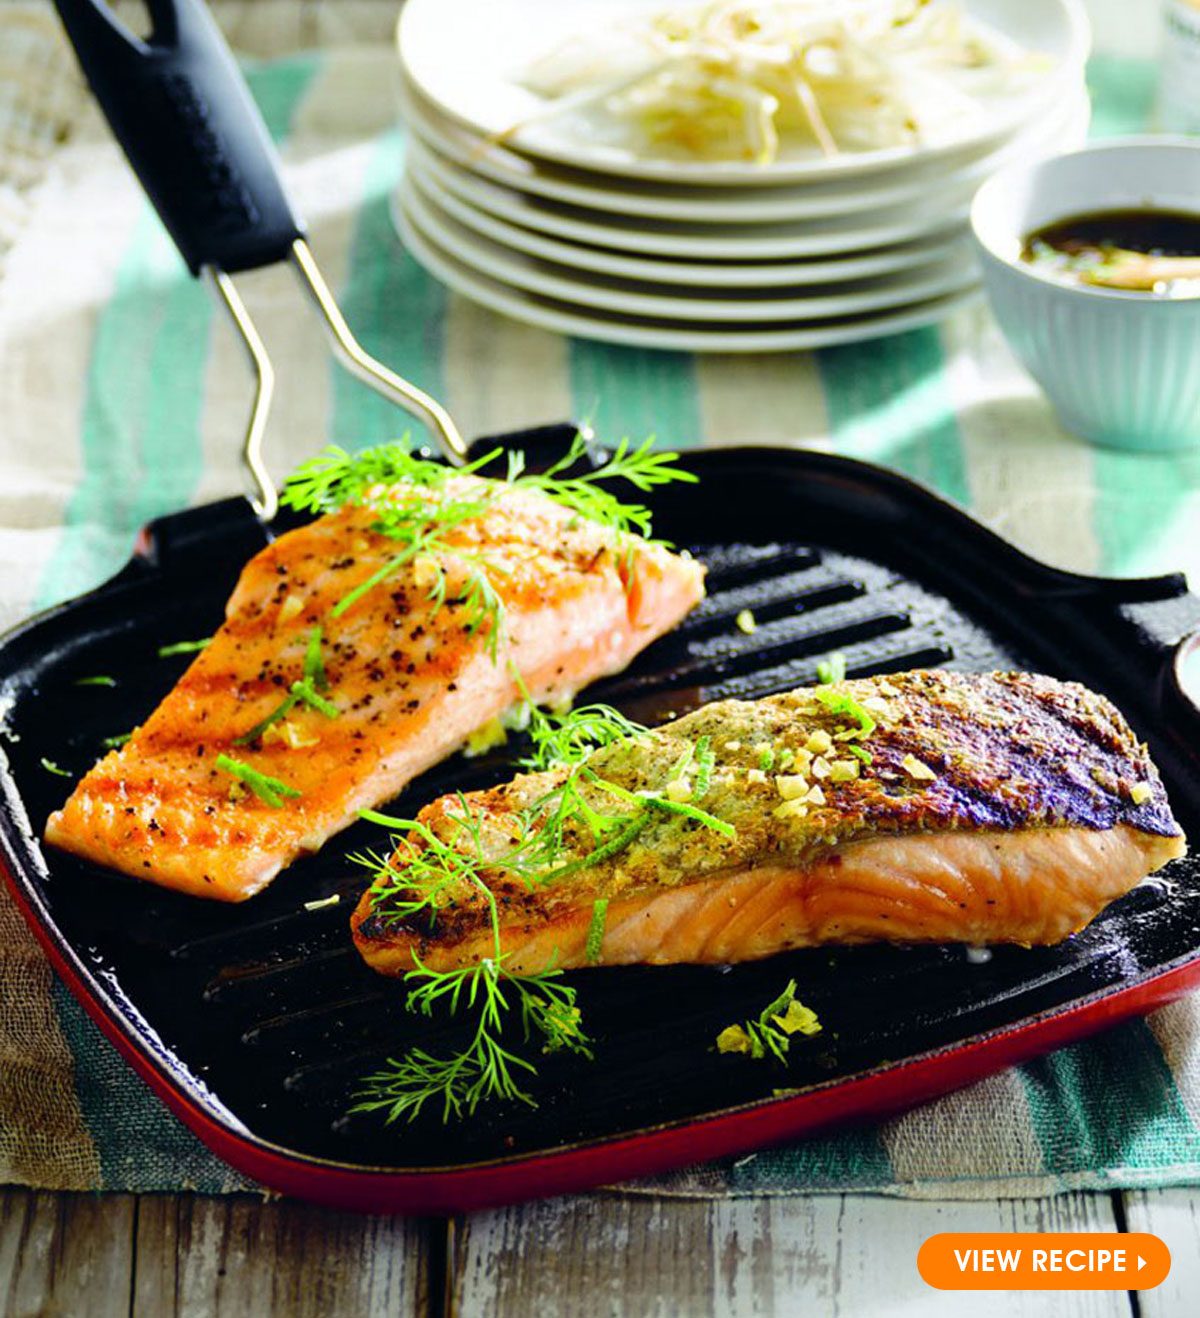 Salmon Fillets with Eastern Salad